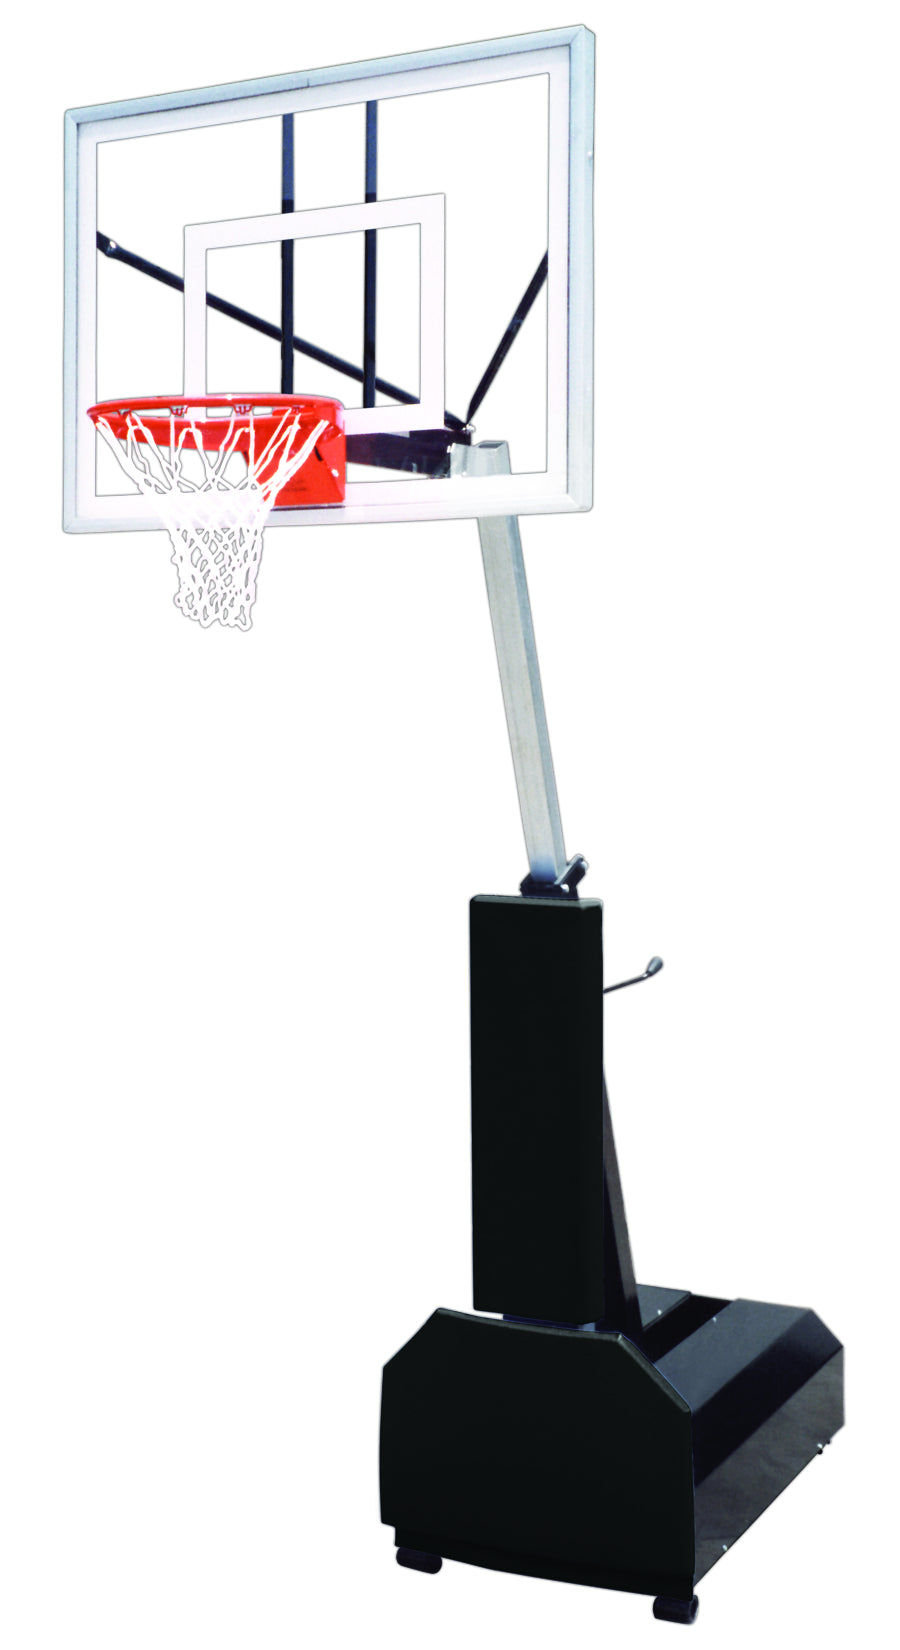 First Team Fury Turbo Portable Basketball Goal - 36"x54" Tempered Glass